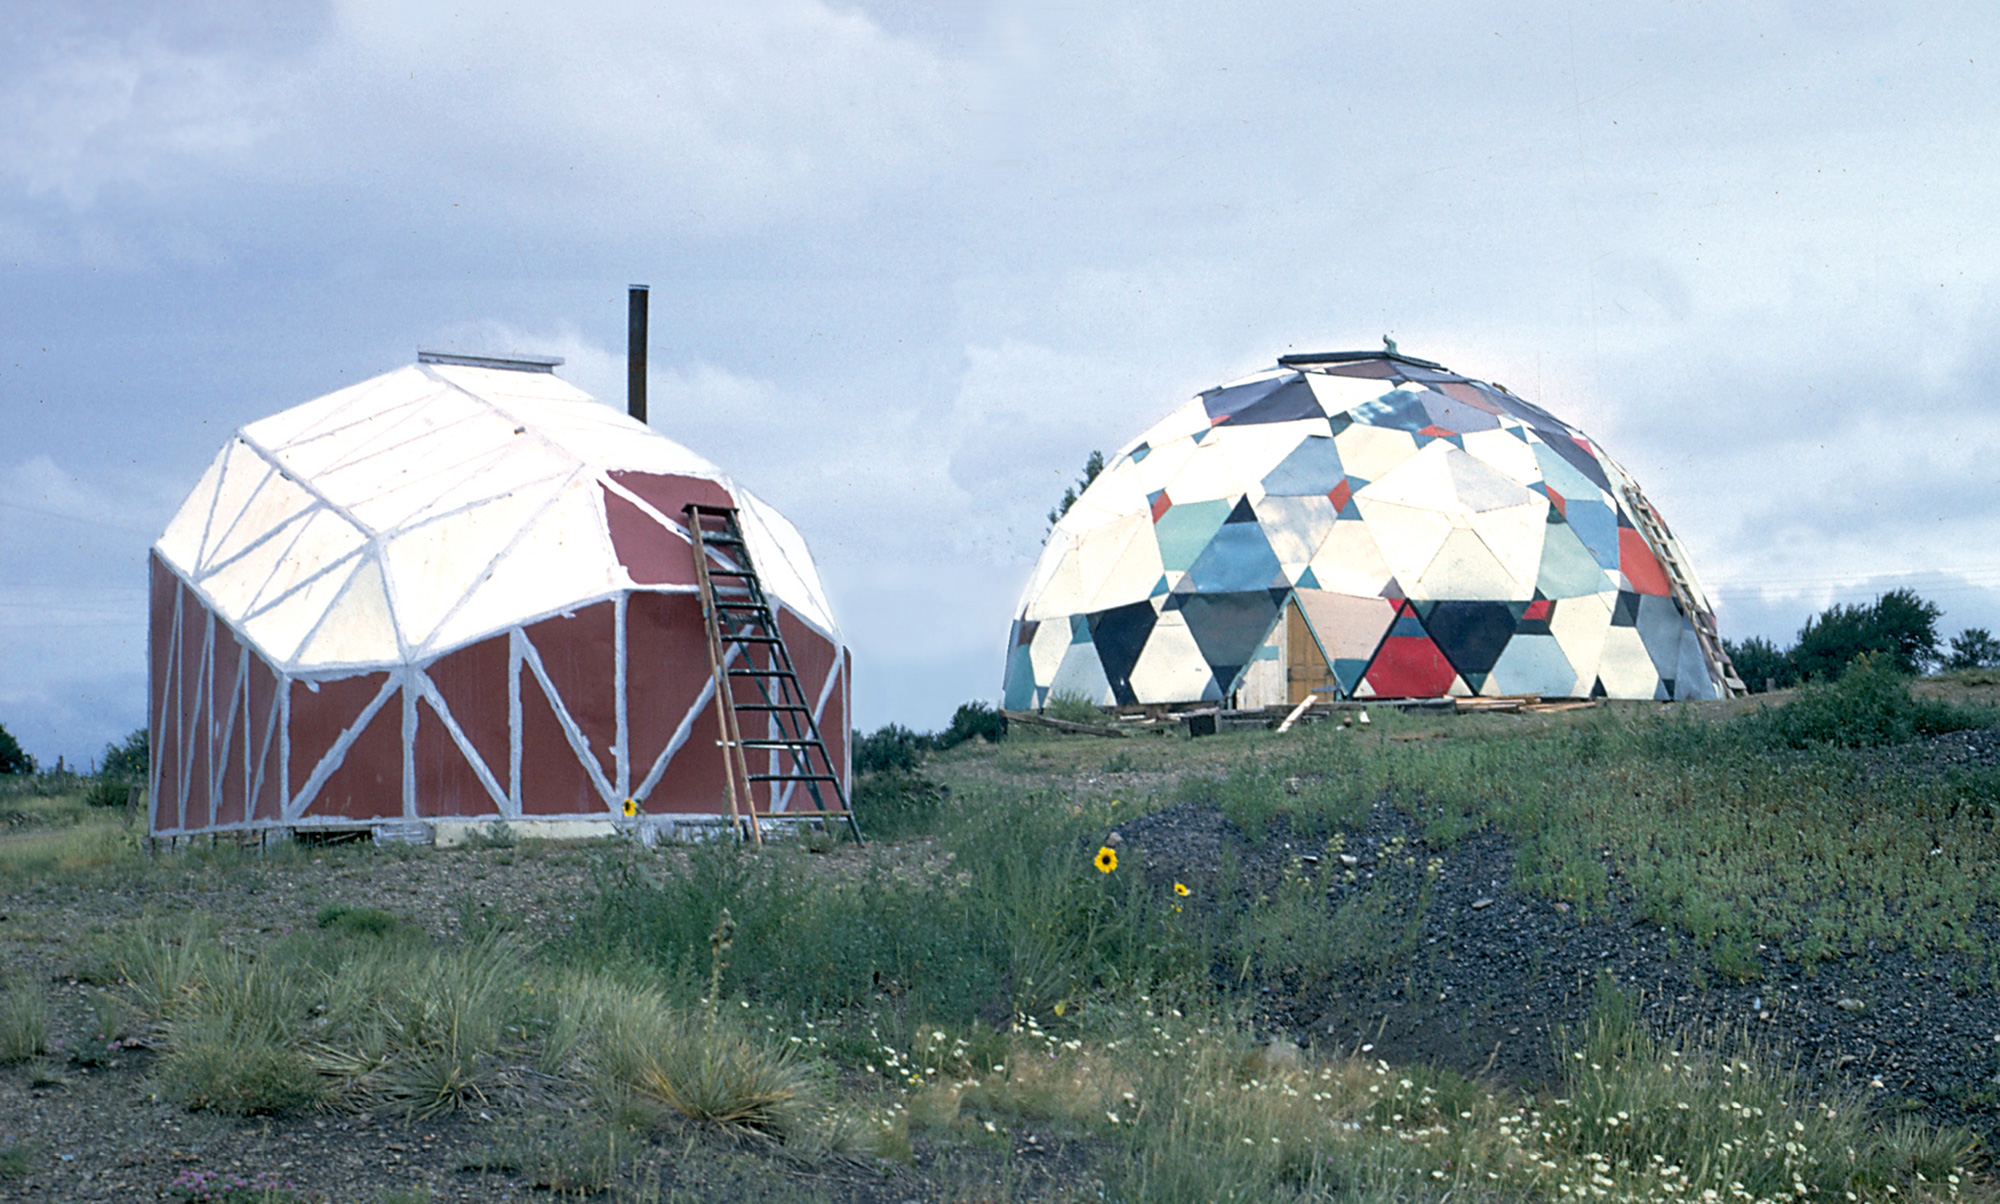 A photograph of Cartop Dome and Theater at Drop City, the utopian community built in southern Colorado in the mid-nineteen sixties.